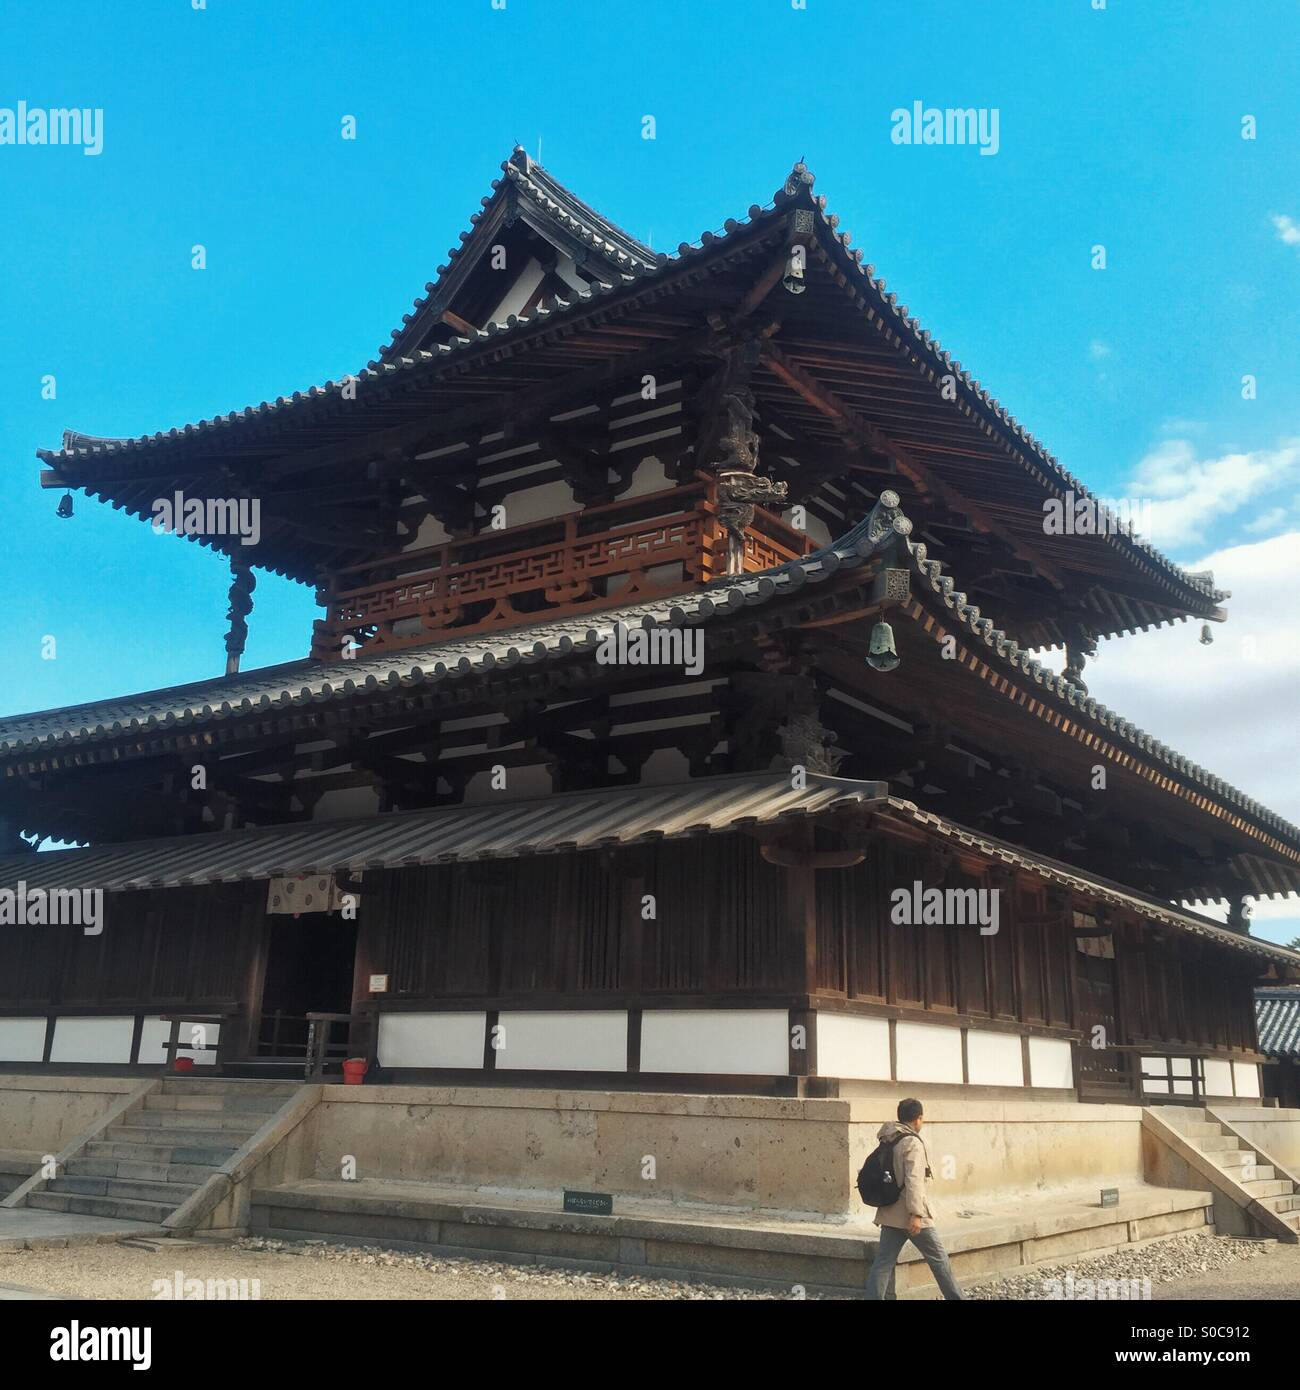 Kondo or Golden Pavilion at Horyu-ji, a Buddhist temple founded in Ikaruga, Nara Prefecture, Japan. Two-storied with a double roof on the first floor. One of the oldest wooden buildings in the world. Stock Photo